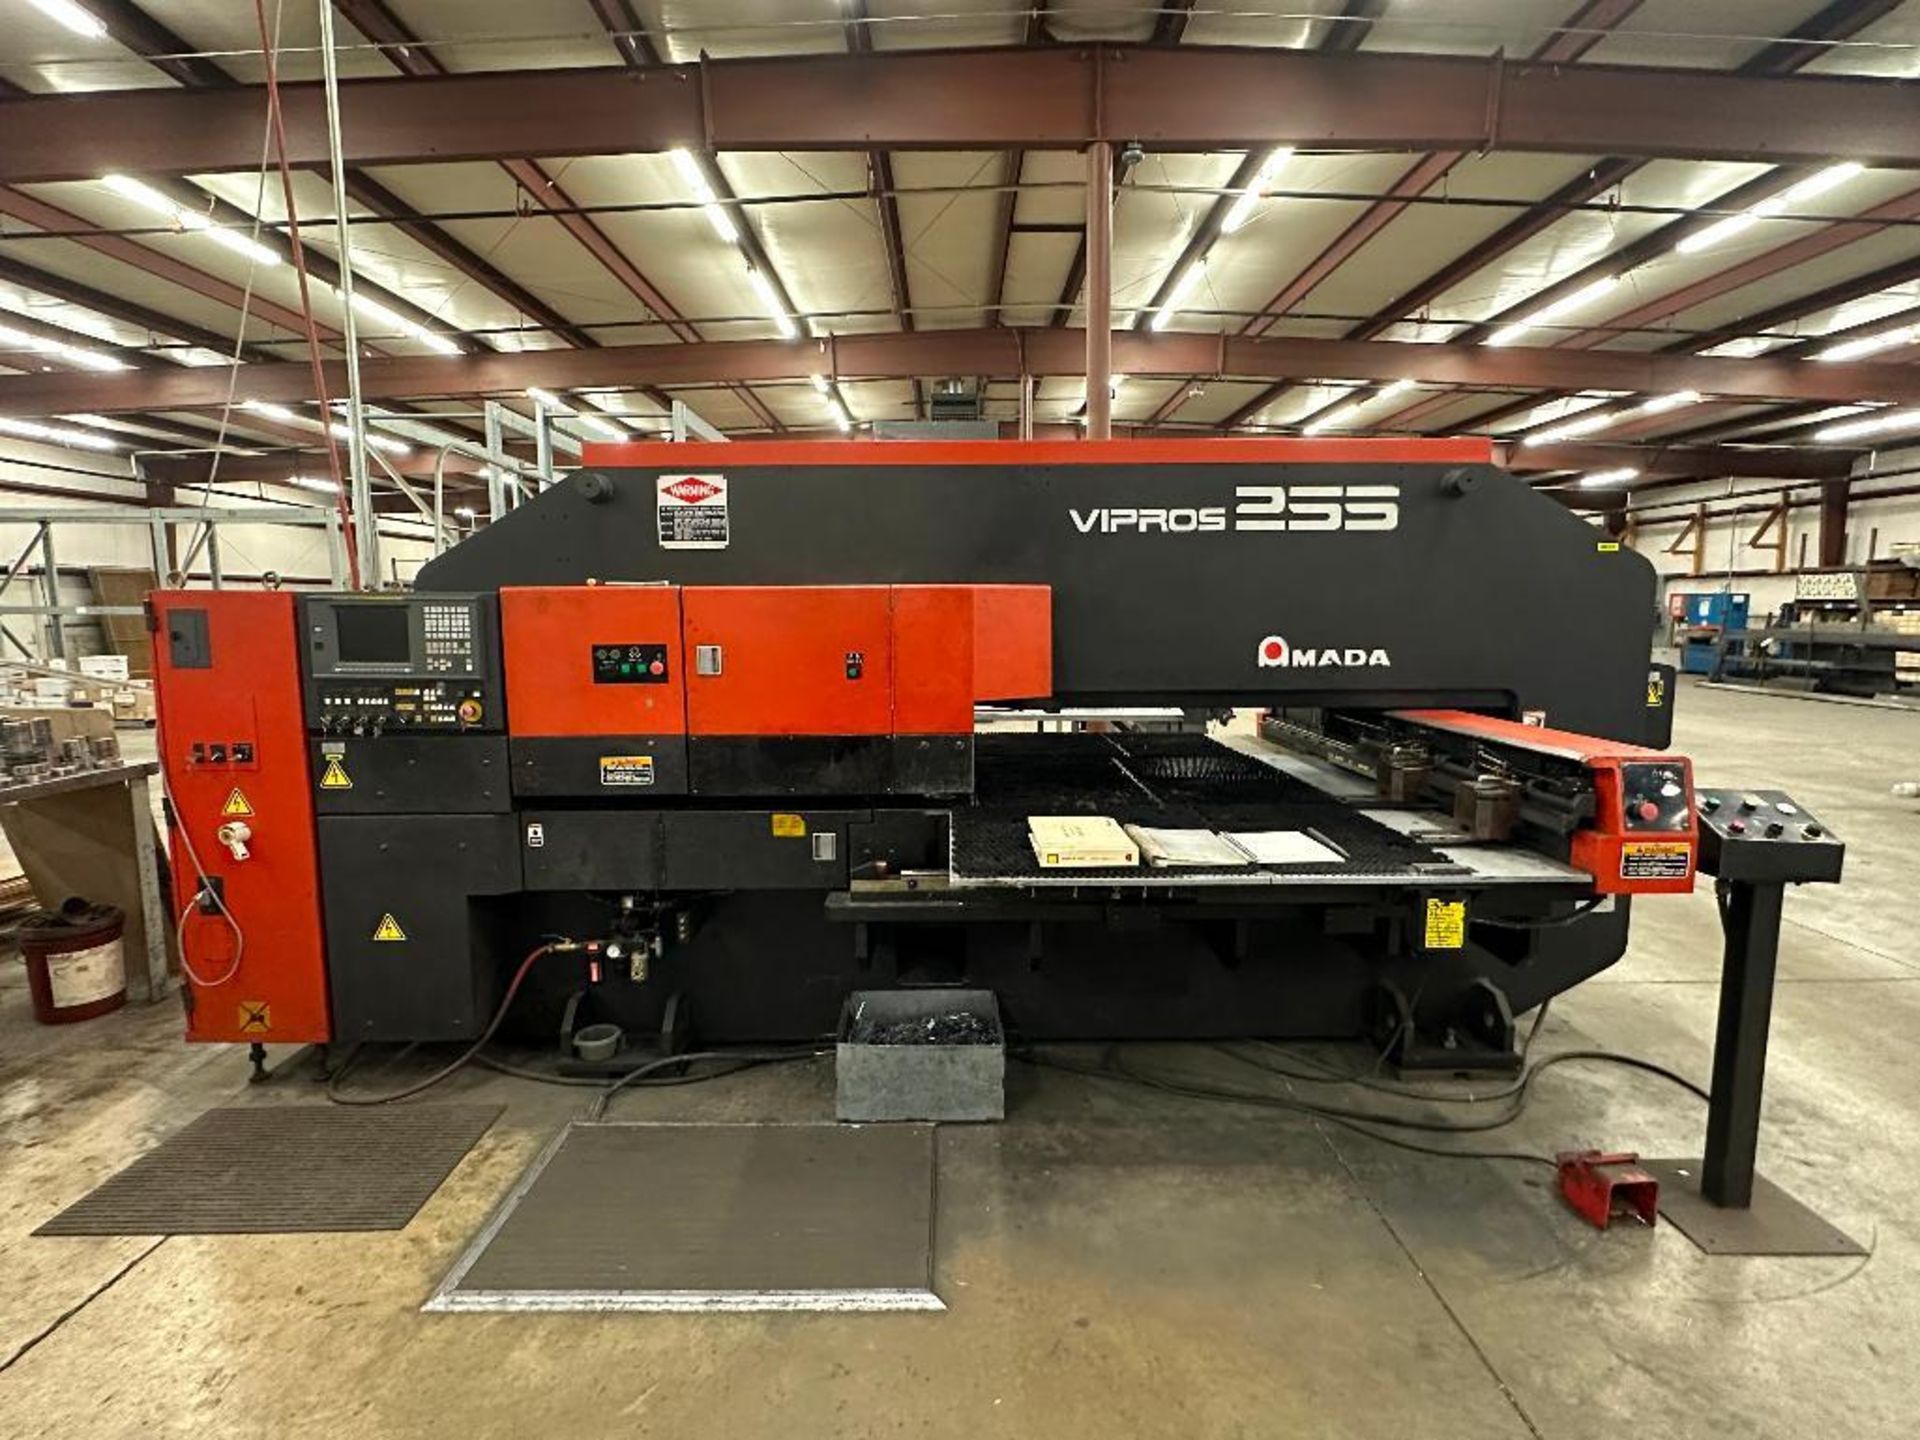 Amada Vipros 255 CNC Turret 20 Ton Press WITH SBC CHILLER AND FULL WORK TABLE OF PARTS AND ACCESSORI - Image 2 of 70